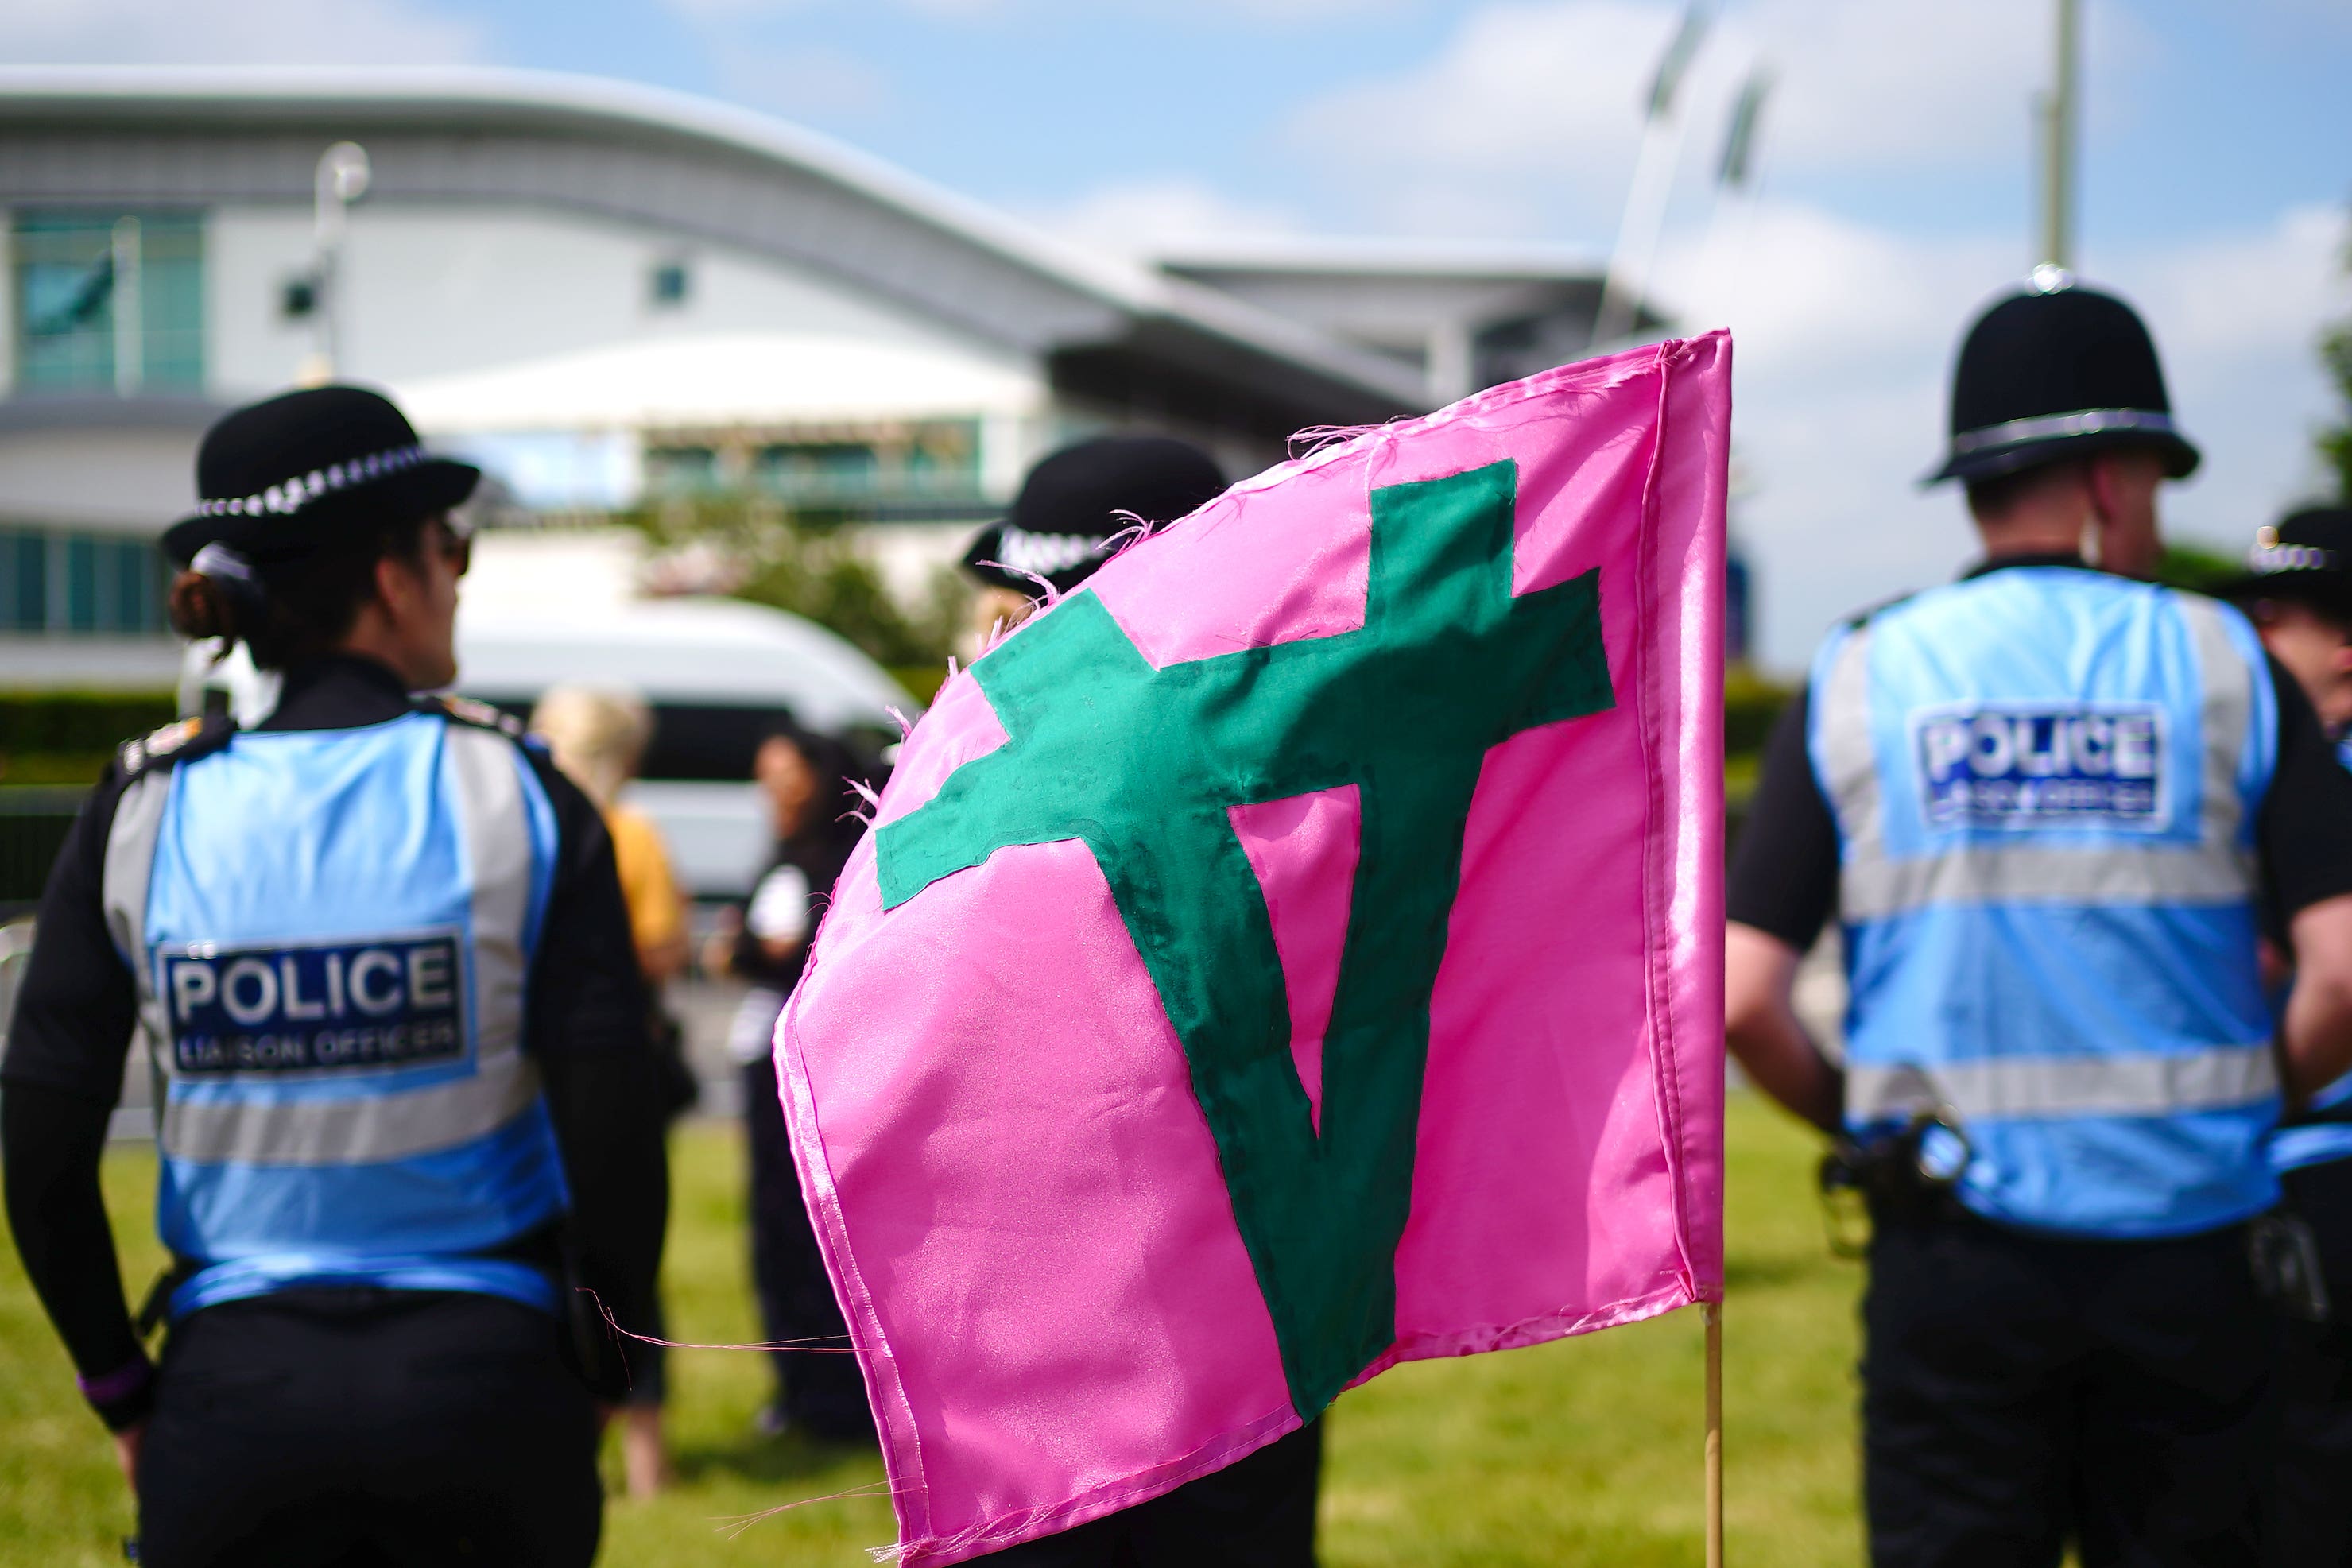 Police Liaison Officers look on in the area where Animal rights protest group Animal Rising are during Derby Day of the 2023 Derby Festival at Epsom Downs Racecourse, Epsom (Victoria Jones/PA)